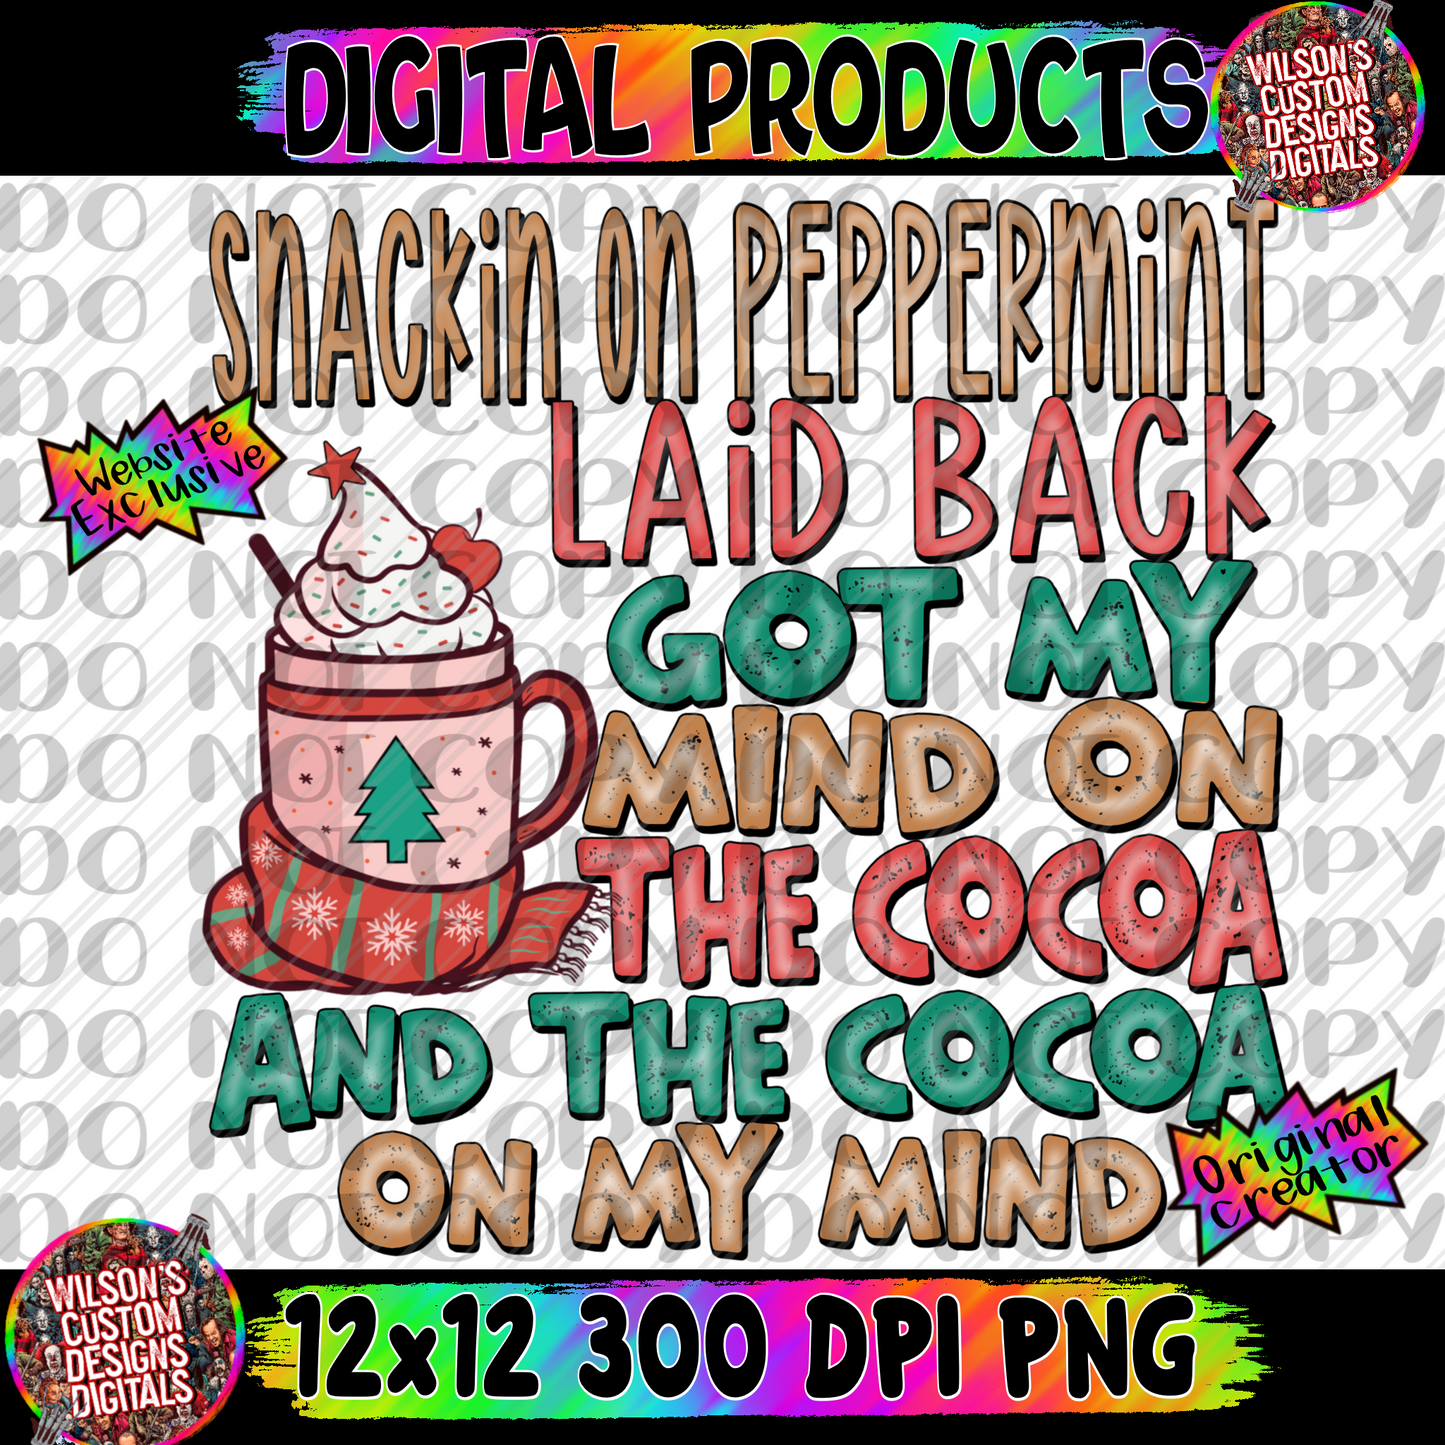 Laid back cocoa peppermint